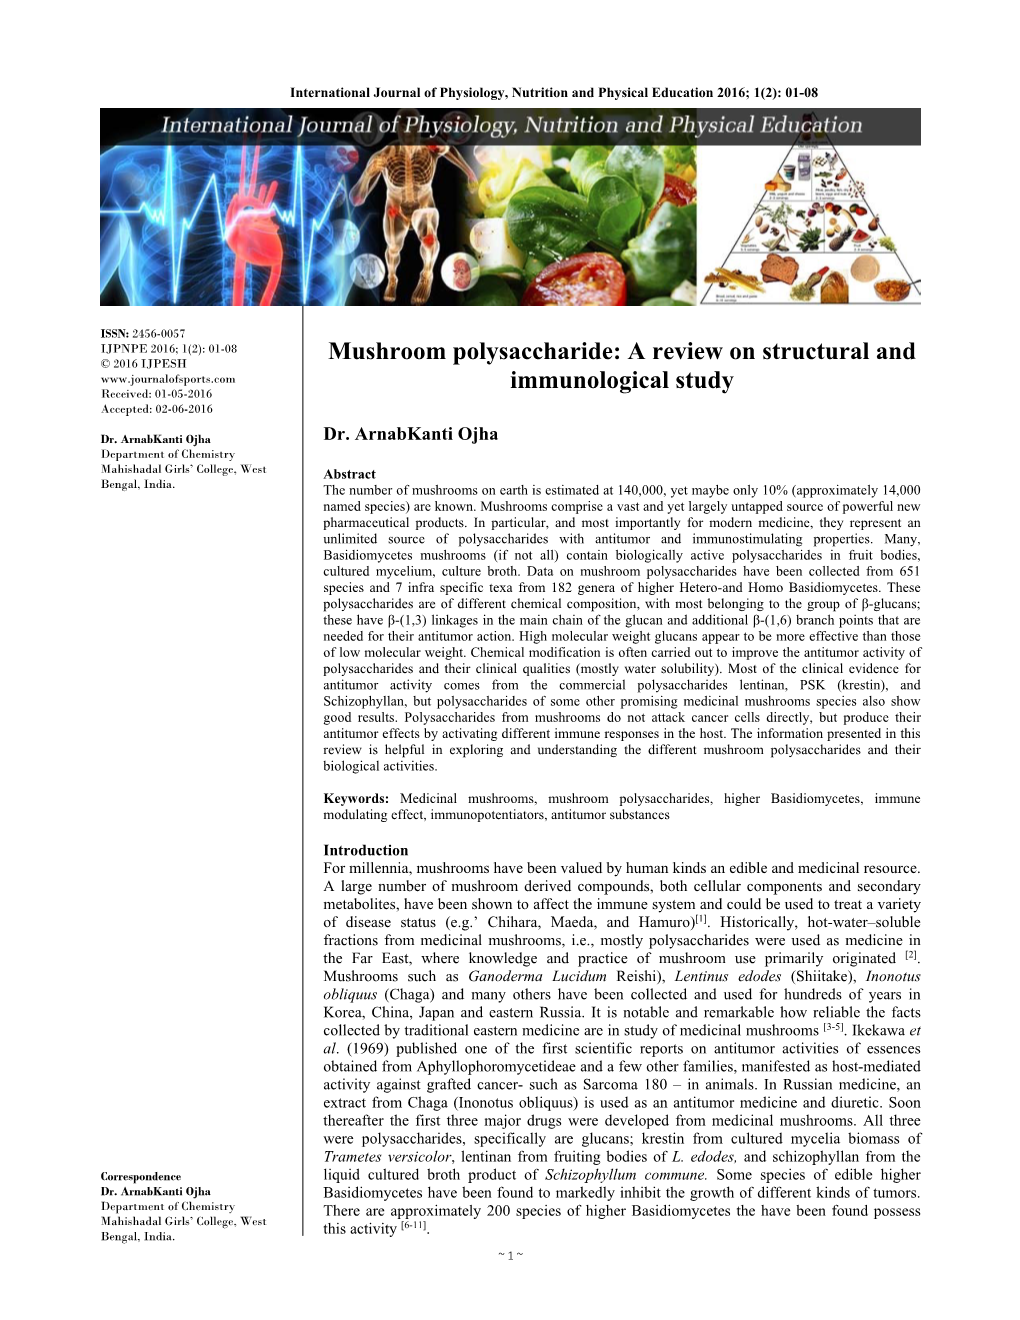 Mushroom Polysaccharide: a Review on Structural and © 2016 IJPESH Immunological Study Received: 01-05-2016 Accepted: 02-06-2016